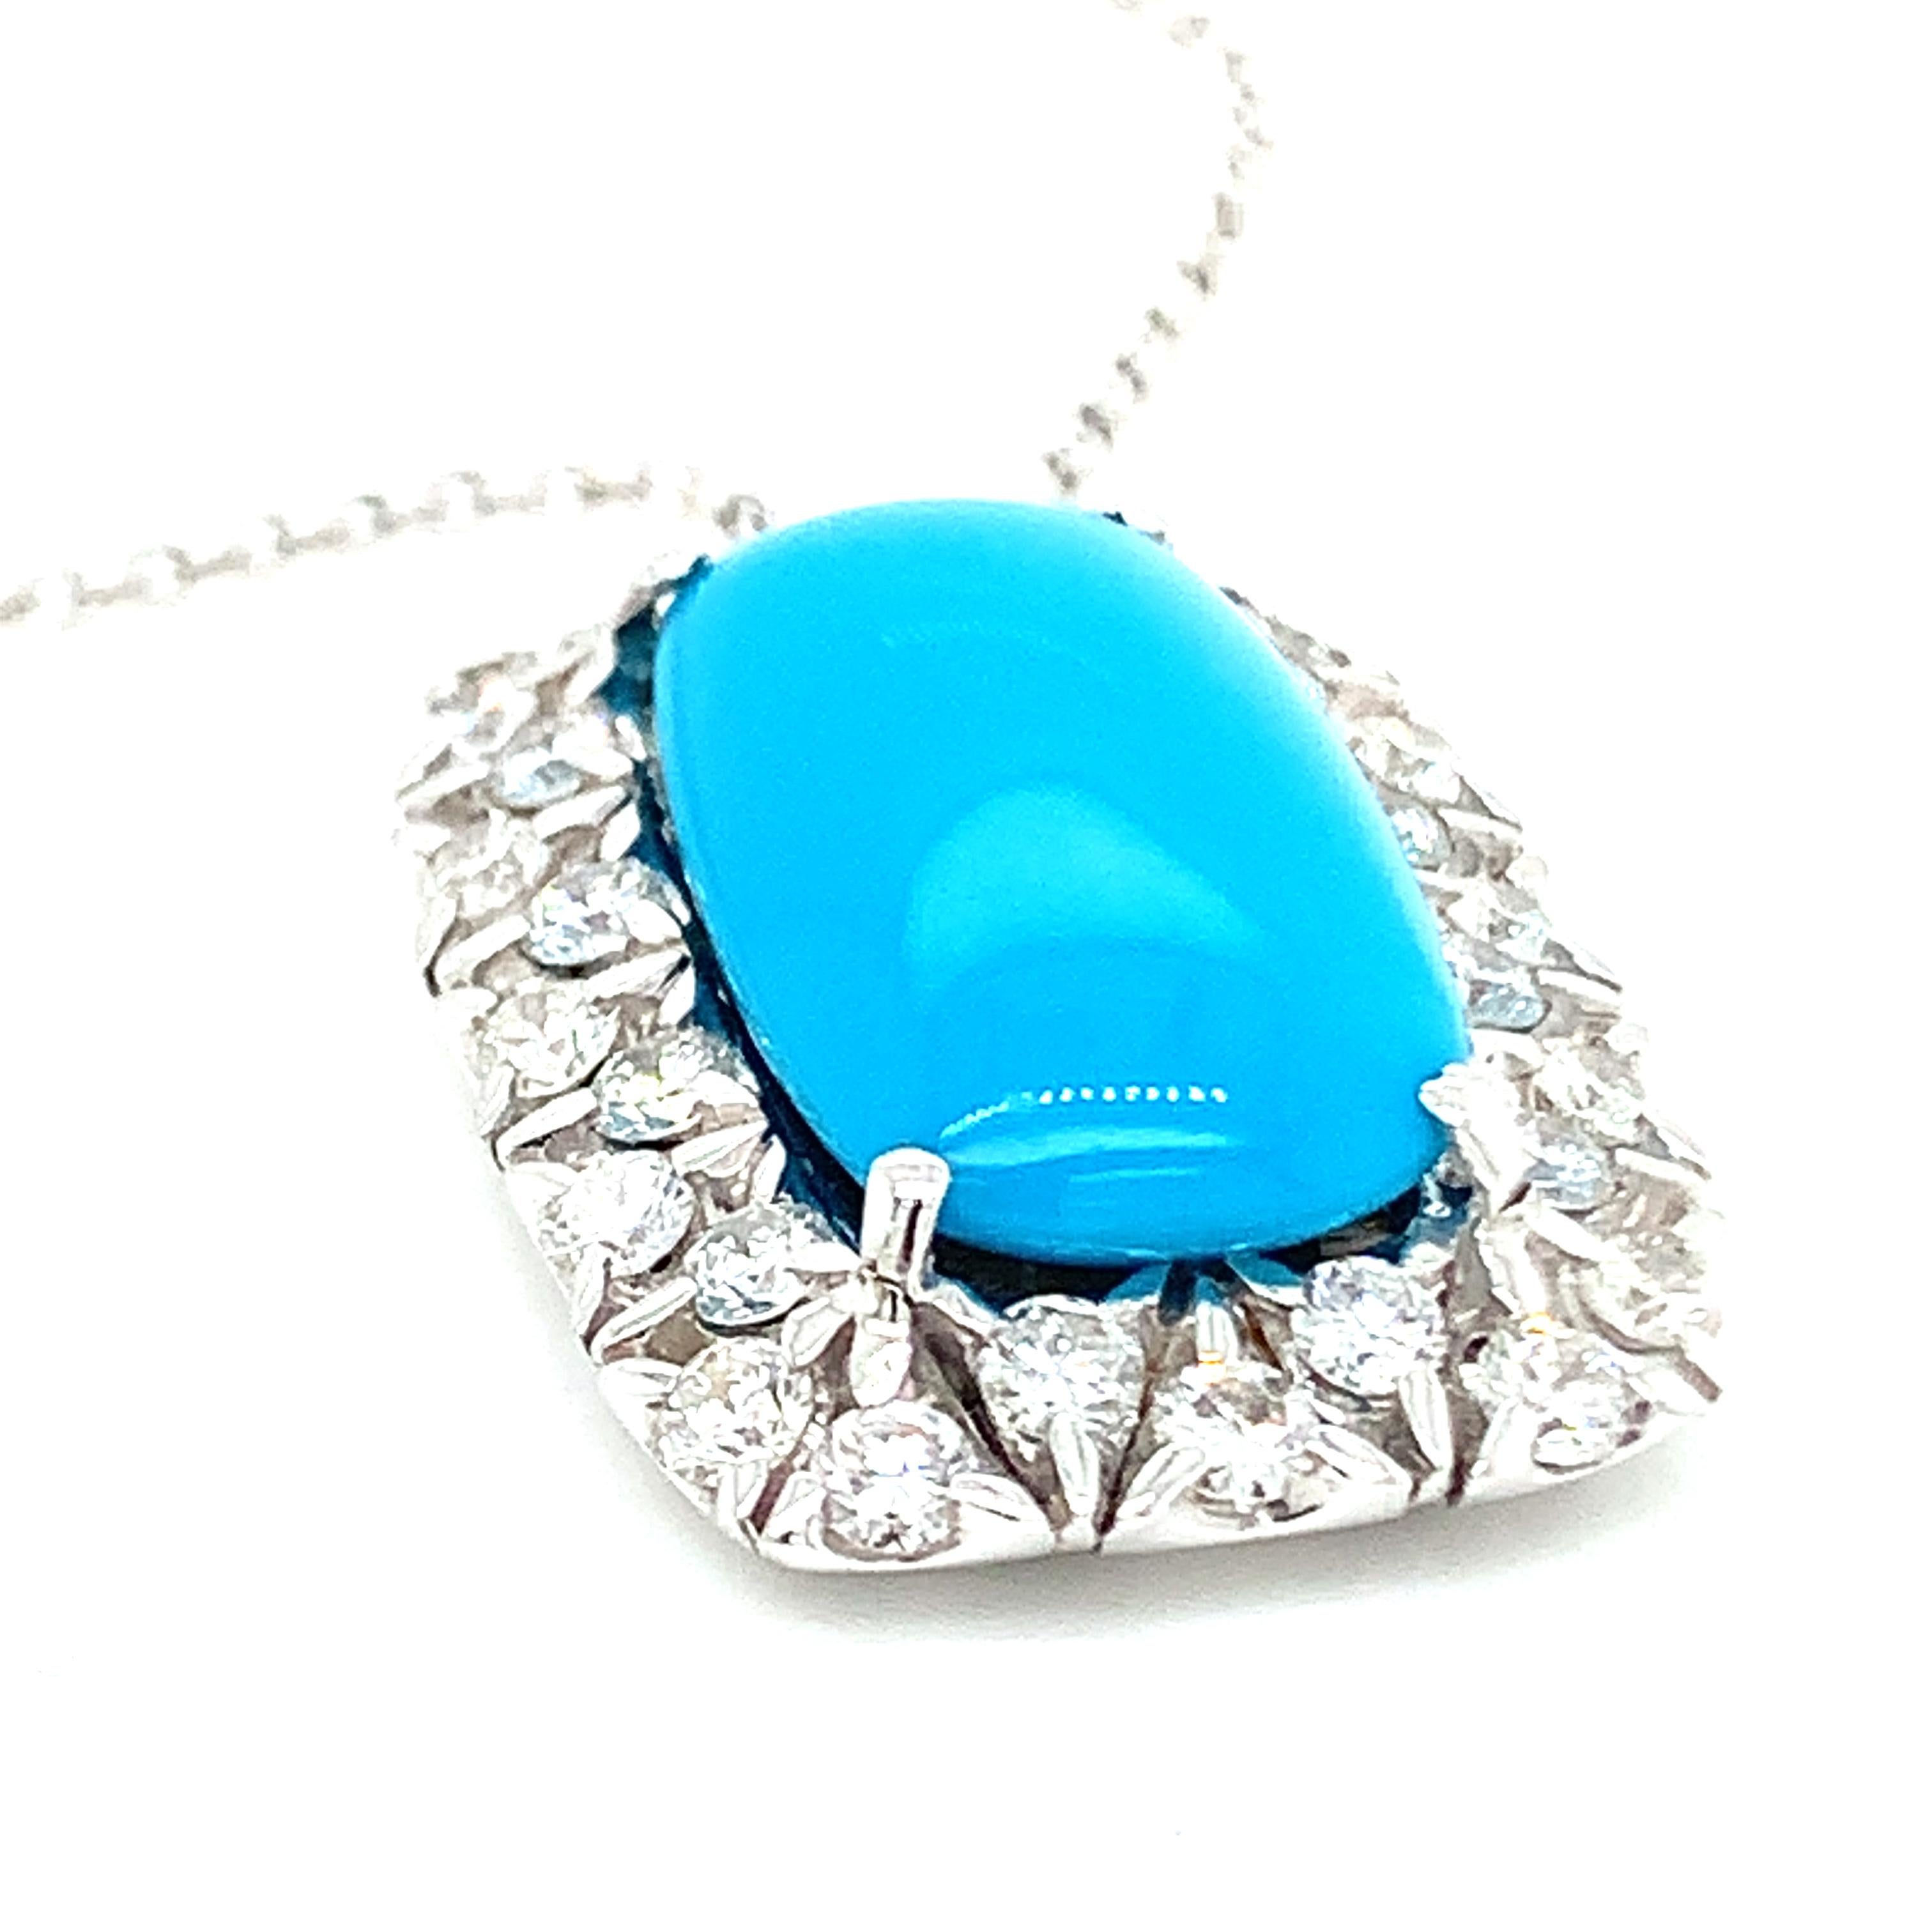 Women's 18 Karat White Gold Garavelli Pendant with Chain with Diamonds and Turquoise For Sale